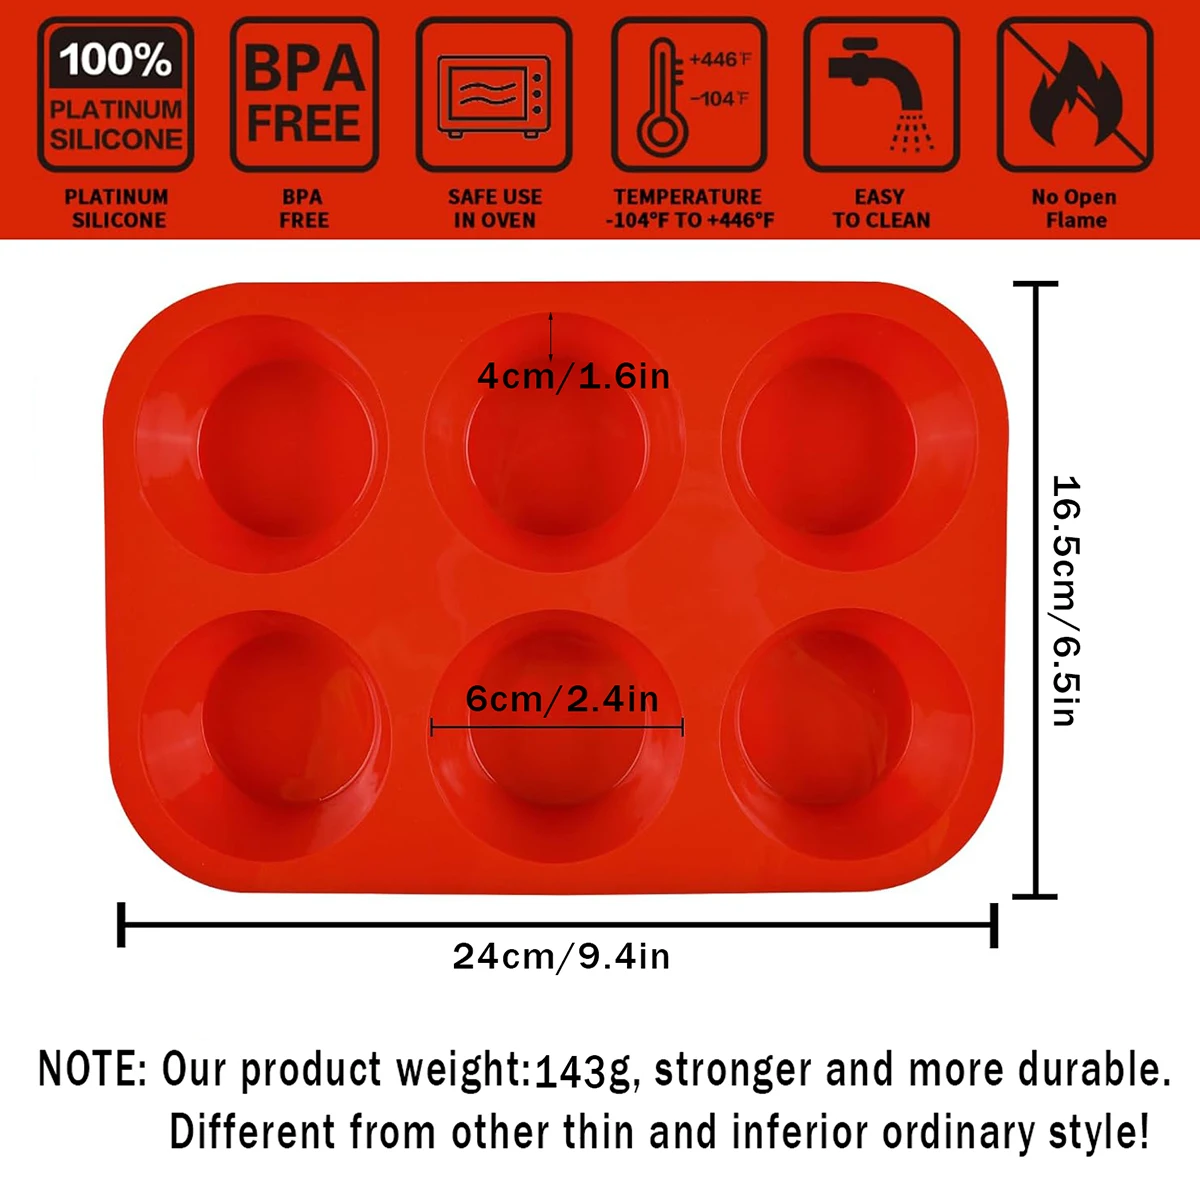 https://ae01.alicdn.com/kf/S111d89bfe28d4906b15389f825f4d786v/Silicone-Muffin-Pan-6-Cups-Non-Stick-Cupcake-Molds-Food-Grade-Silicone-Baking-Tray-BPA-Free.jpg